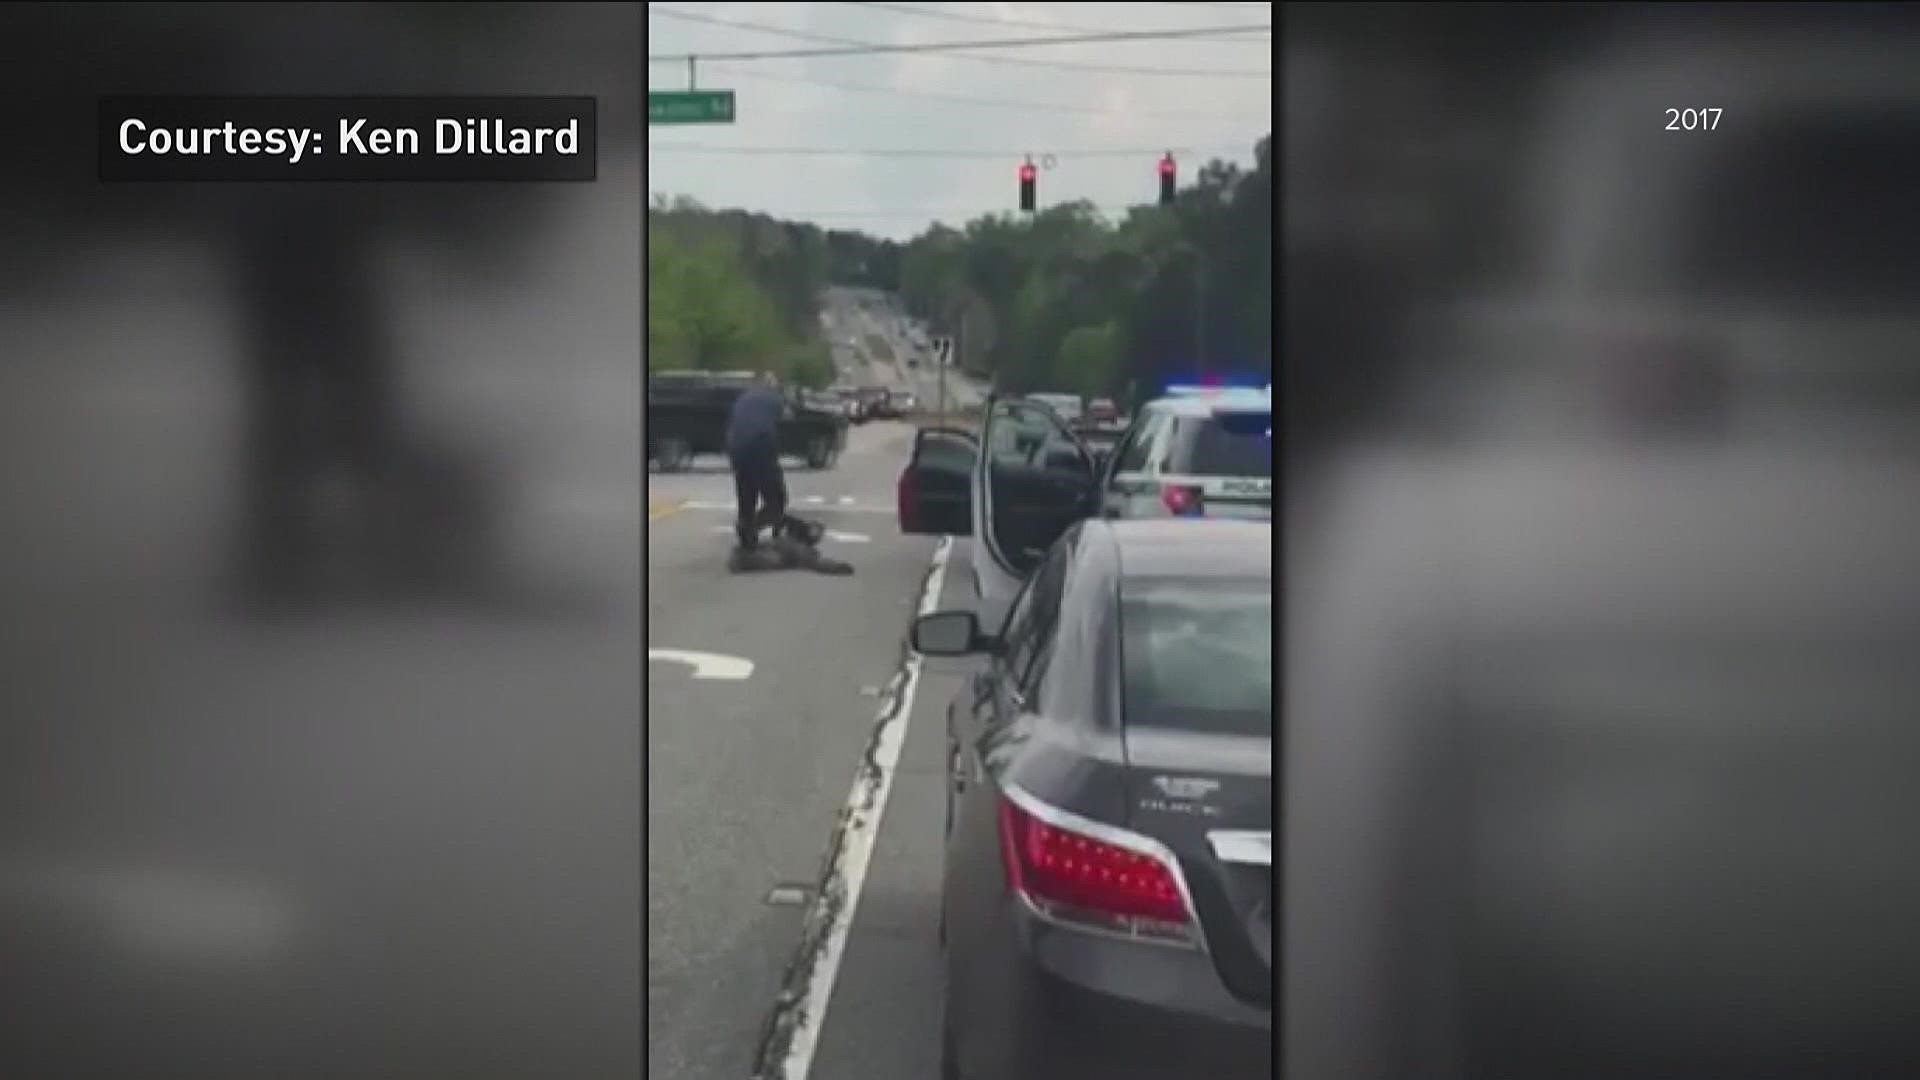 Back in September Demetrius Hollins filed a suit against Gwinnett County, Gwinnett Police Chief Butch Ayers and officers involved in the incident.